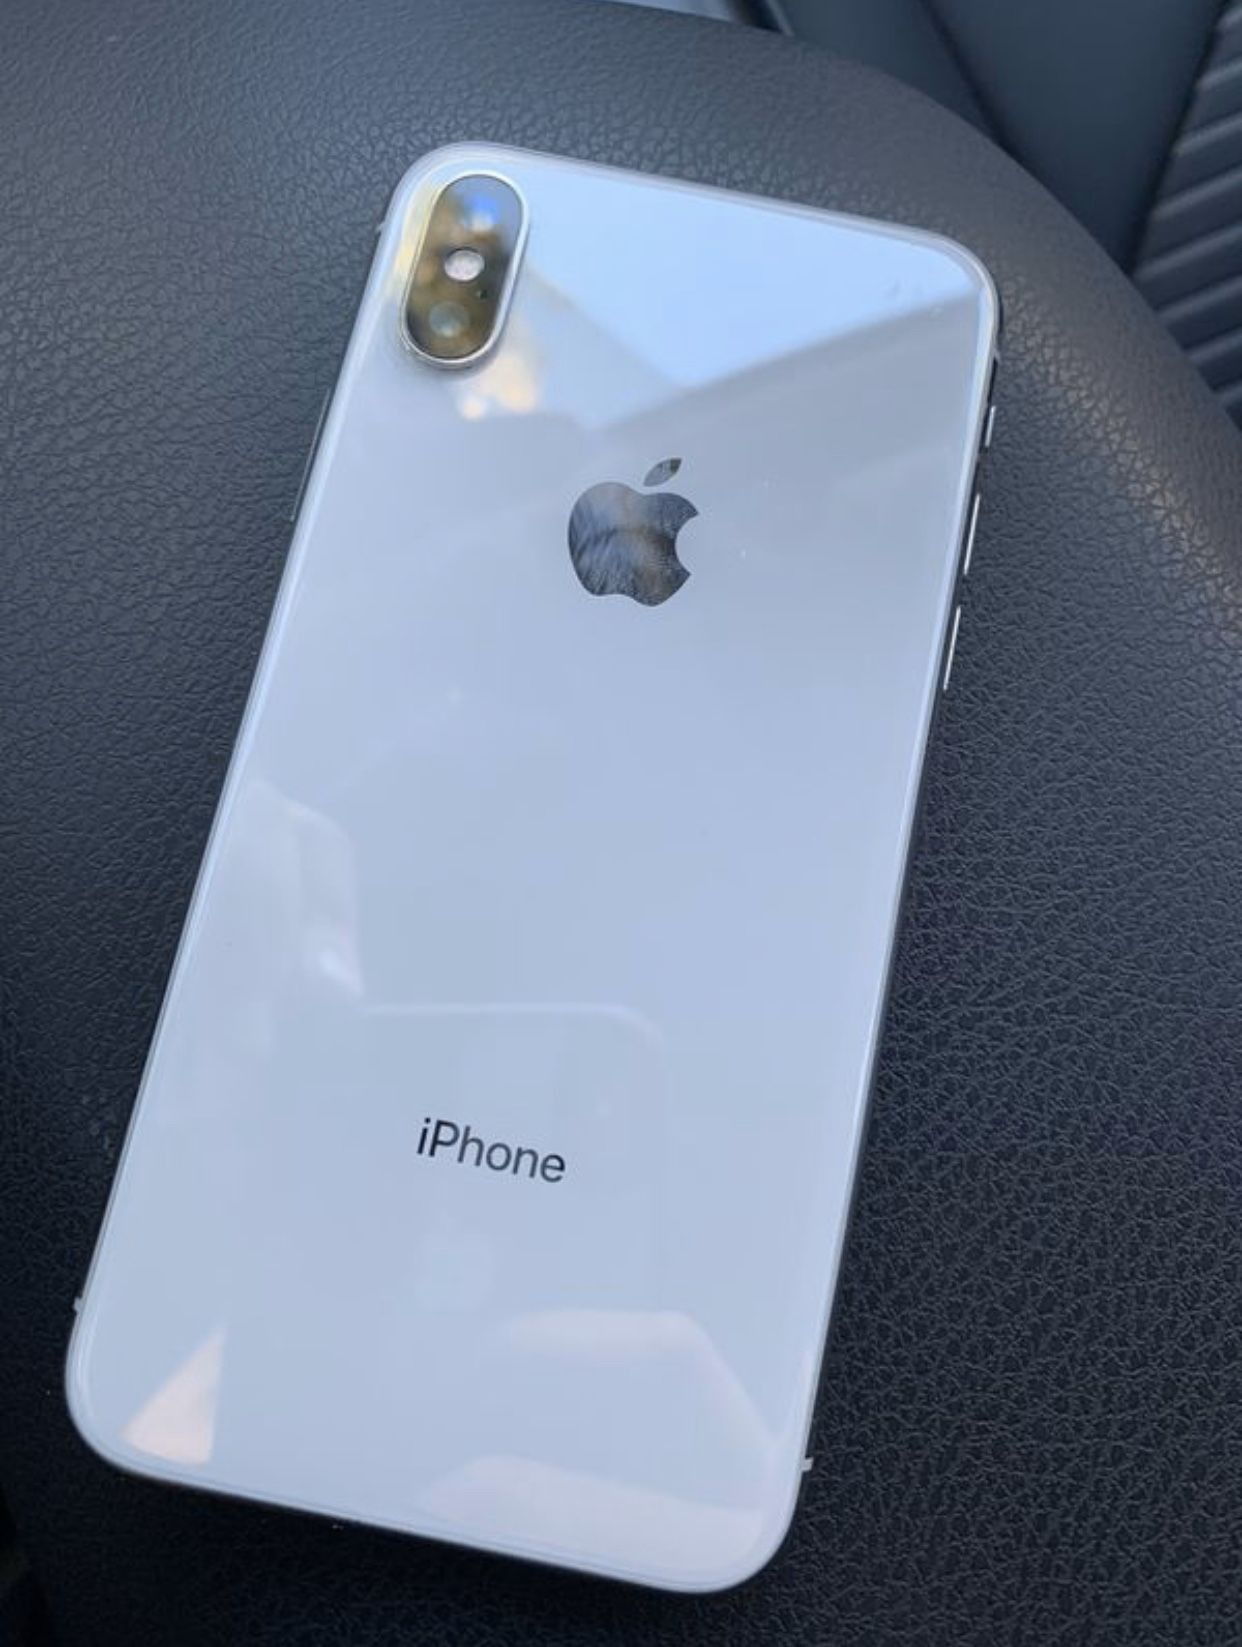 iPhone X, Does not turn on, selling for parts